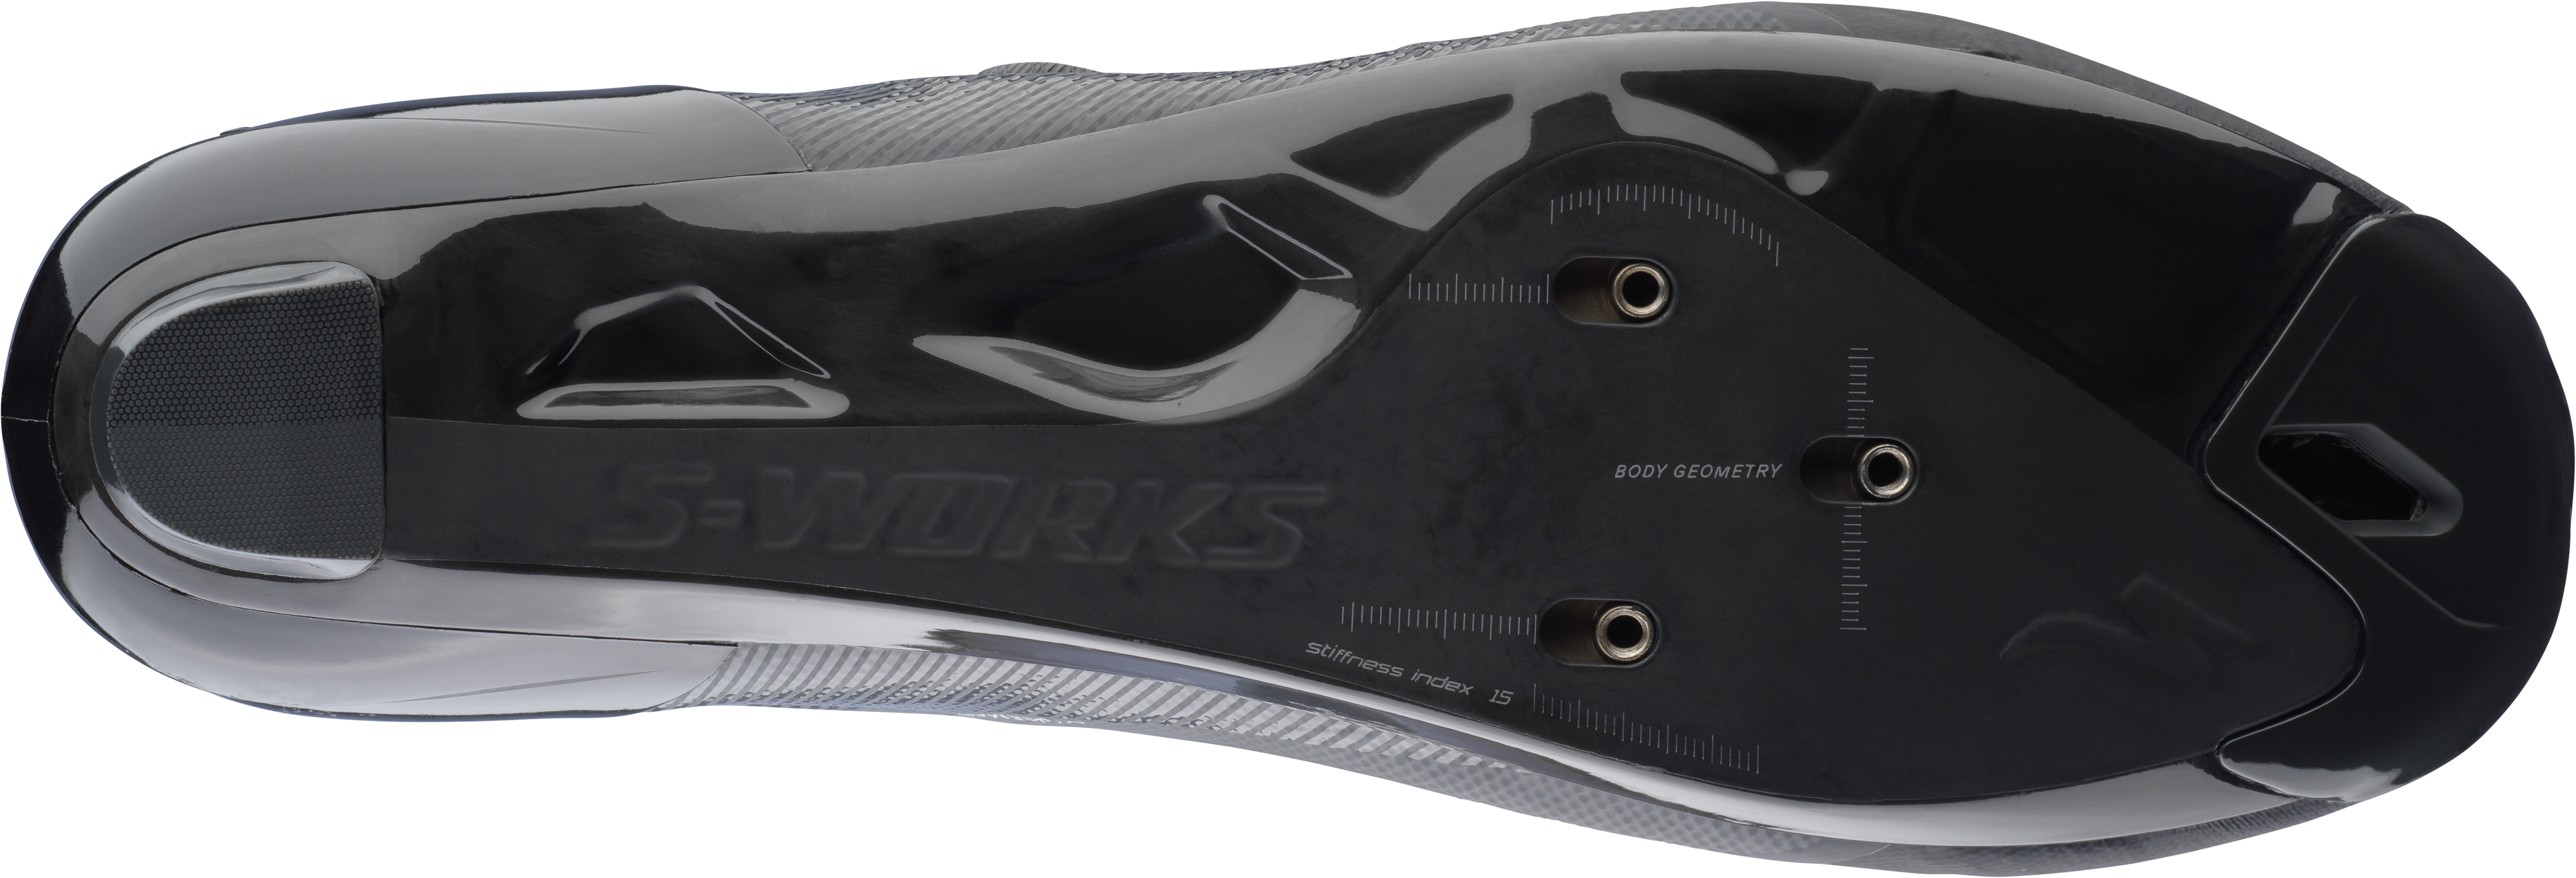 S-Works 7 Road Shoes | Specialized.com